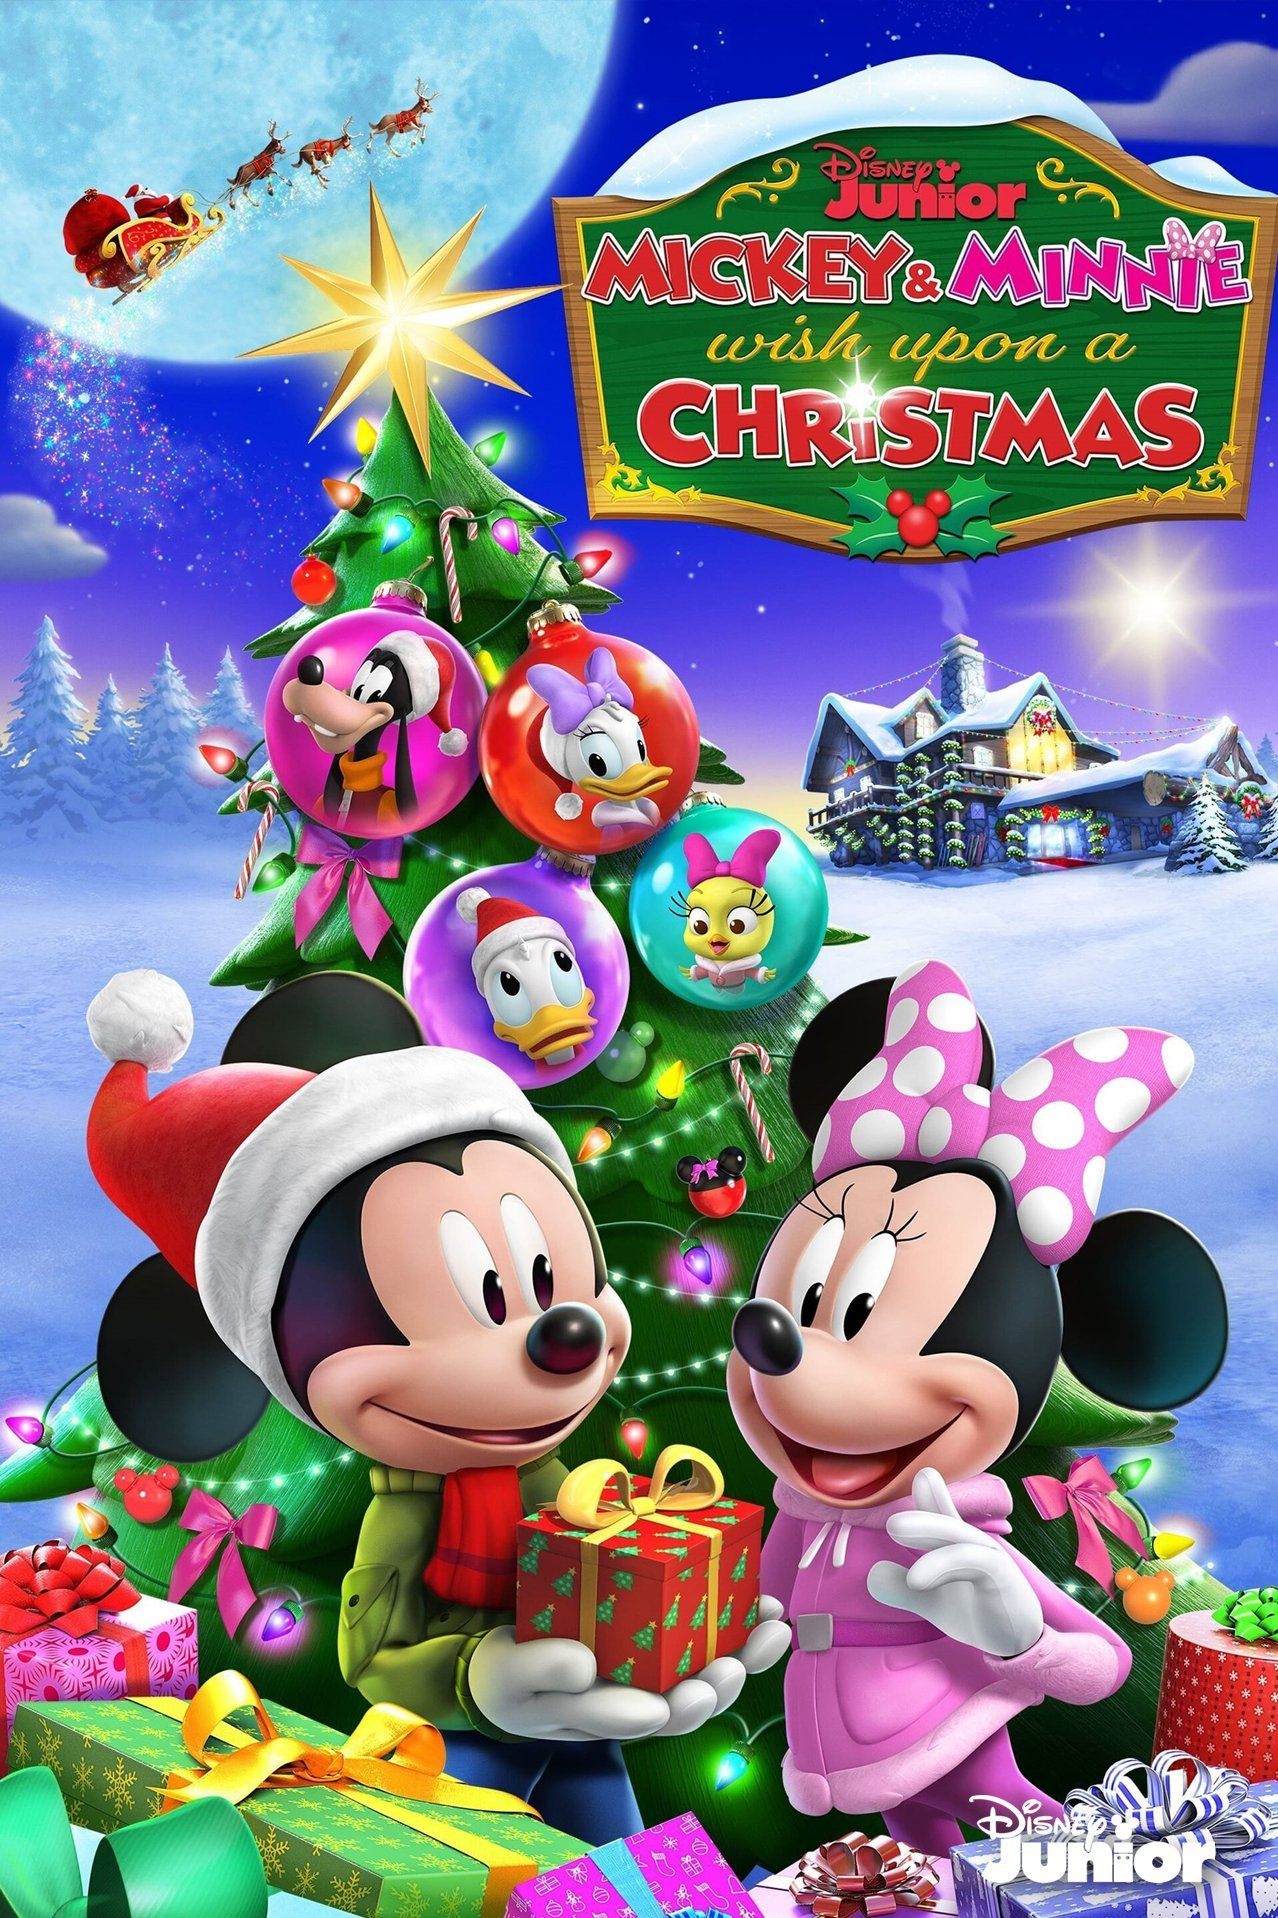 Tahití milicia Materialismo Mickey and Minnie Wish Upon a Christmas | Christmas Specials Wiki | Fandom